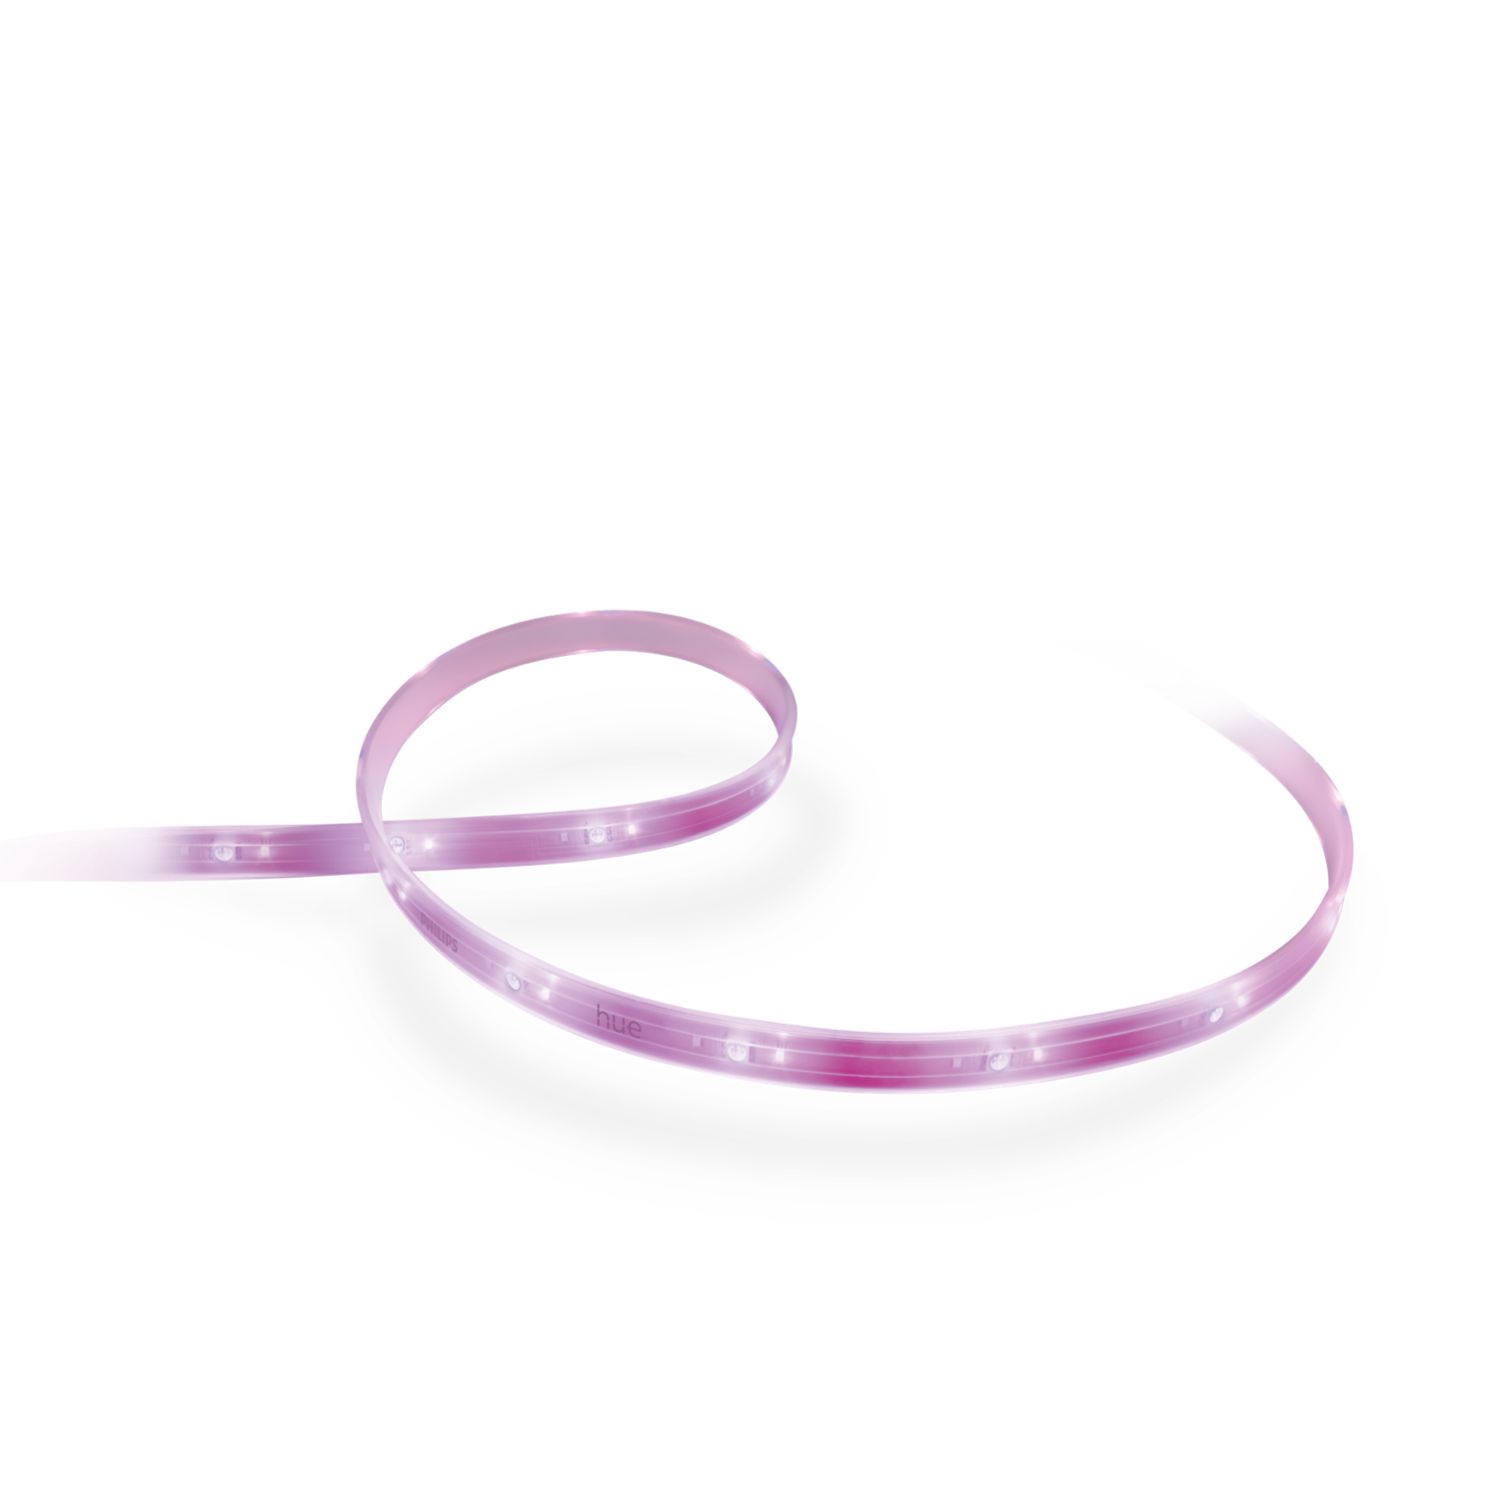 Hue White and color ambiance Lightstrip extension V4 40 inch | Philips Hue US